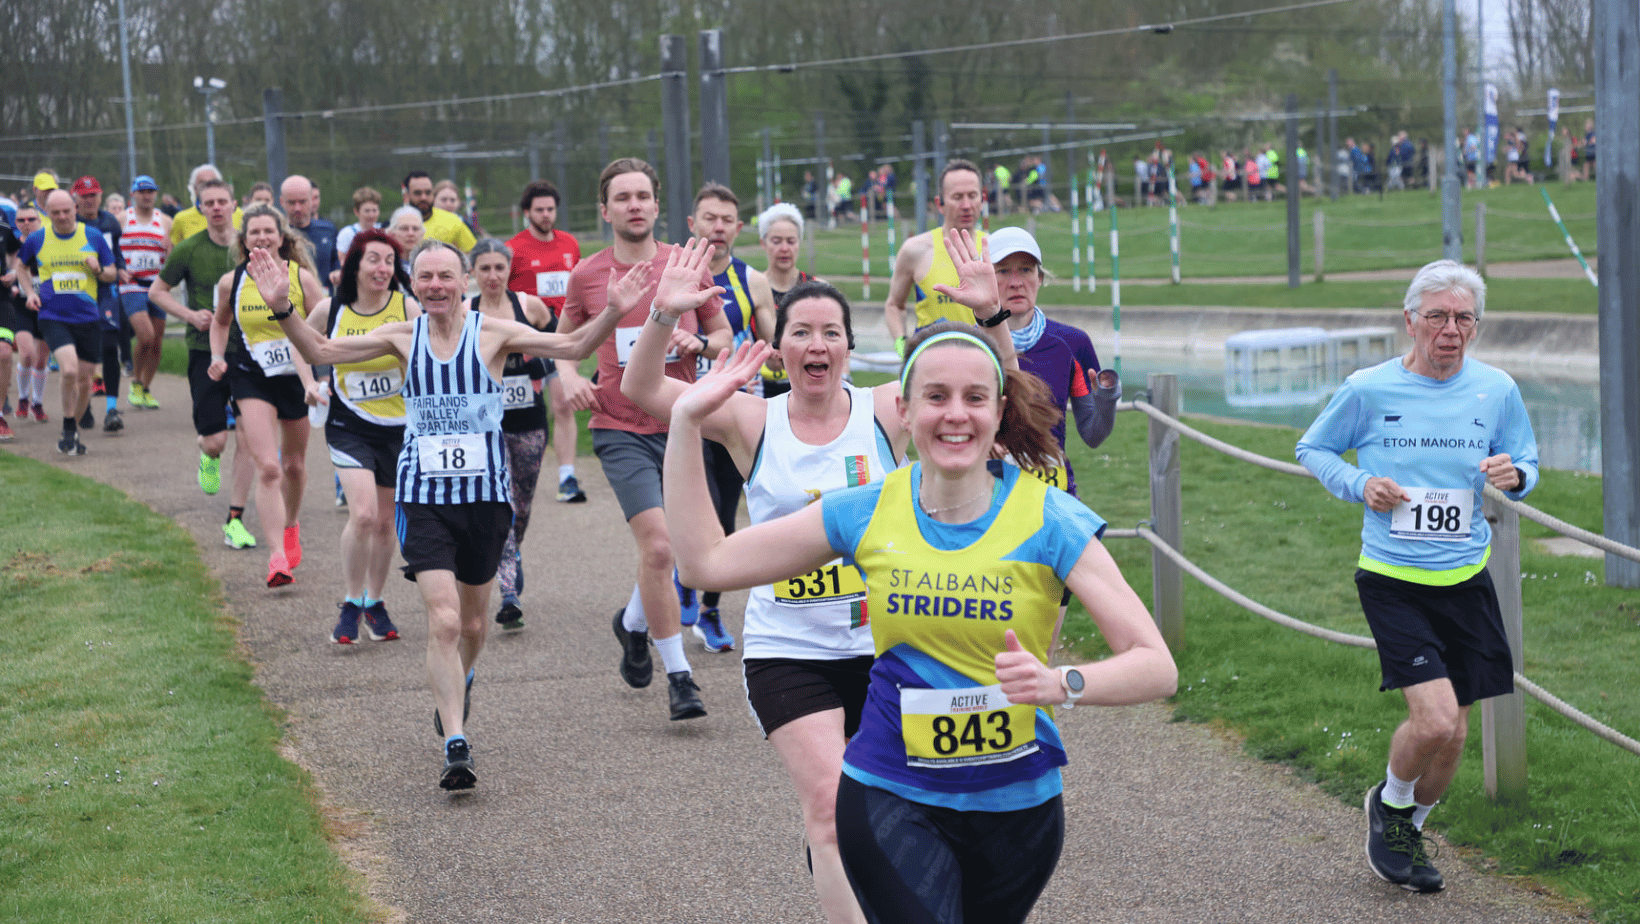 ATW Run Fest at Lee Valley